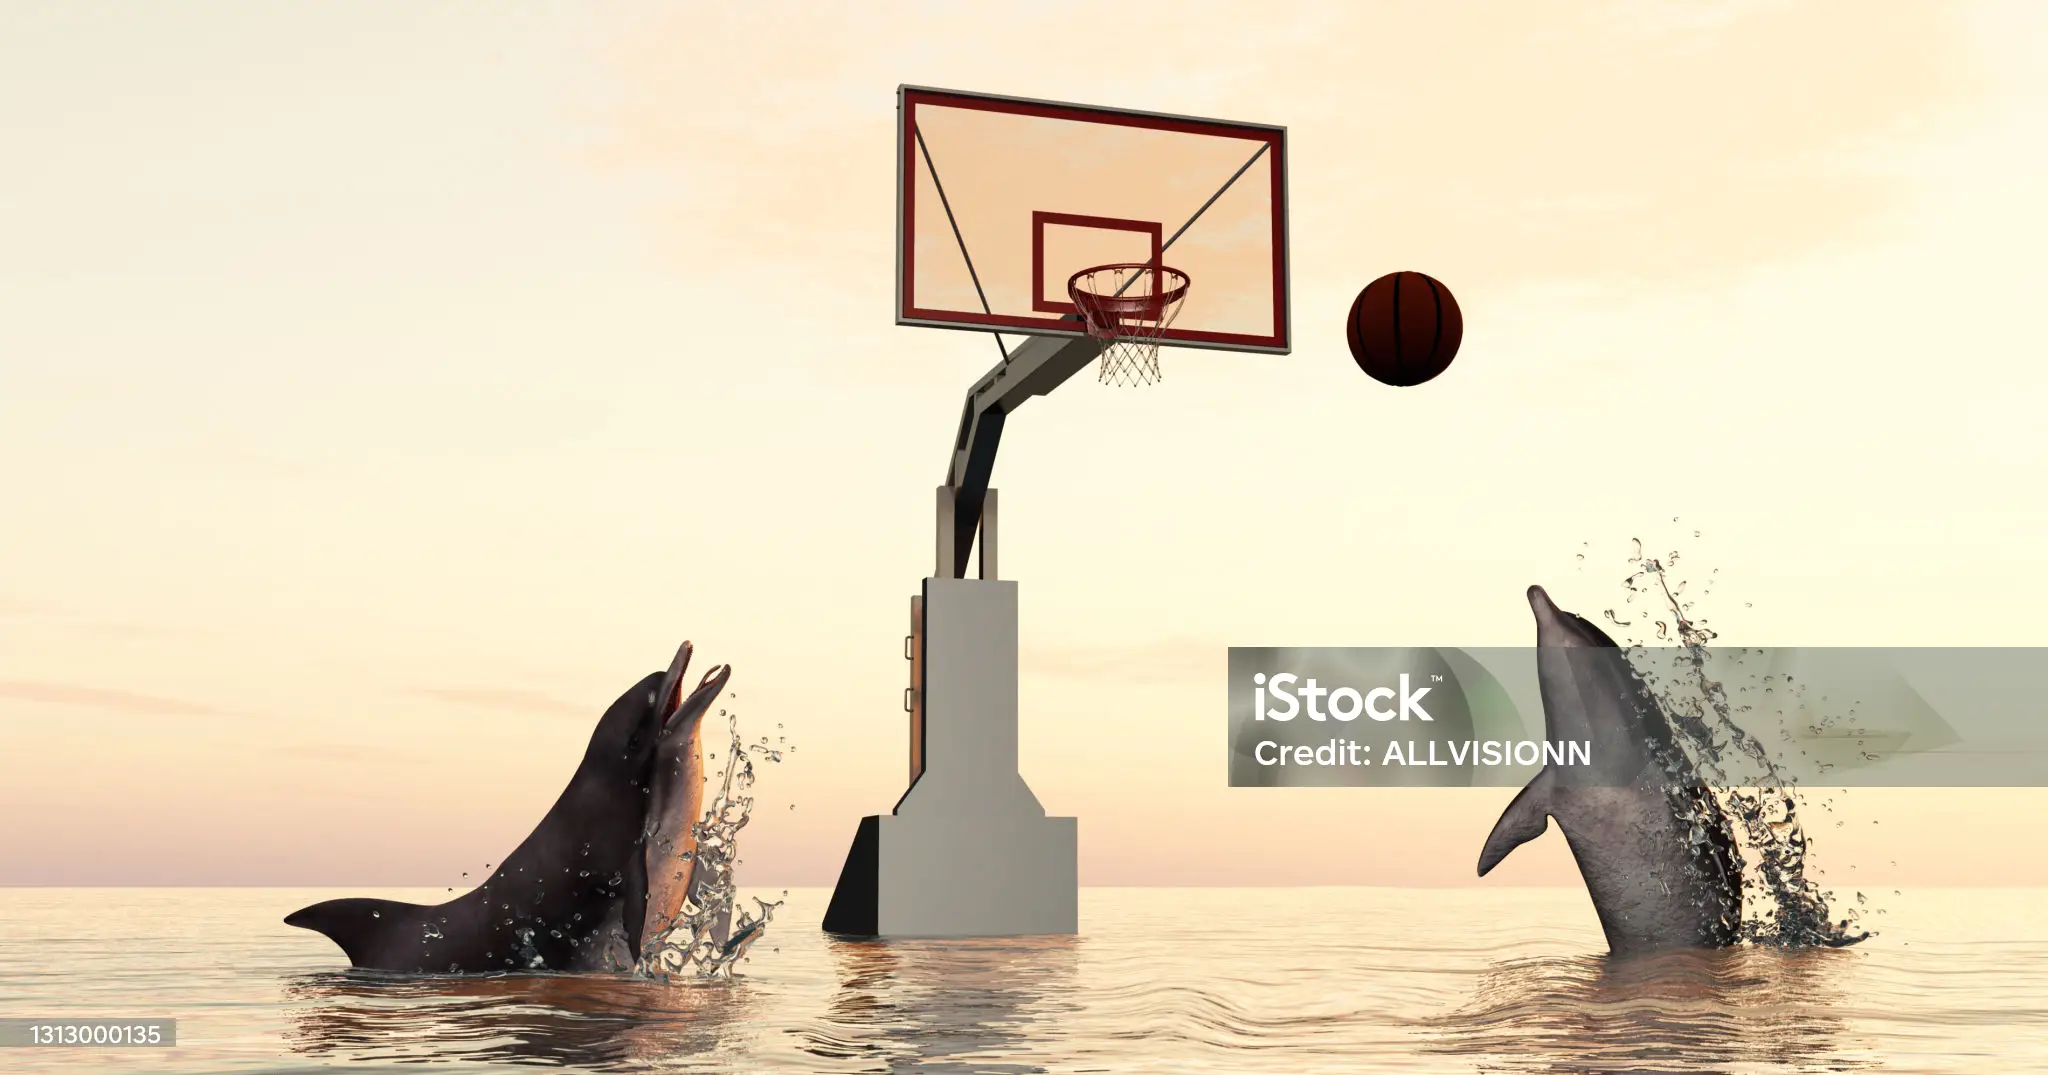 dolphins-playing-basketball-in-the-ocean-this-is-a-3d-render-illustration.webp